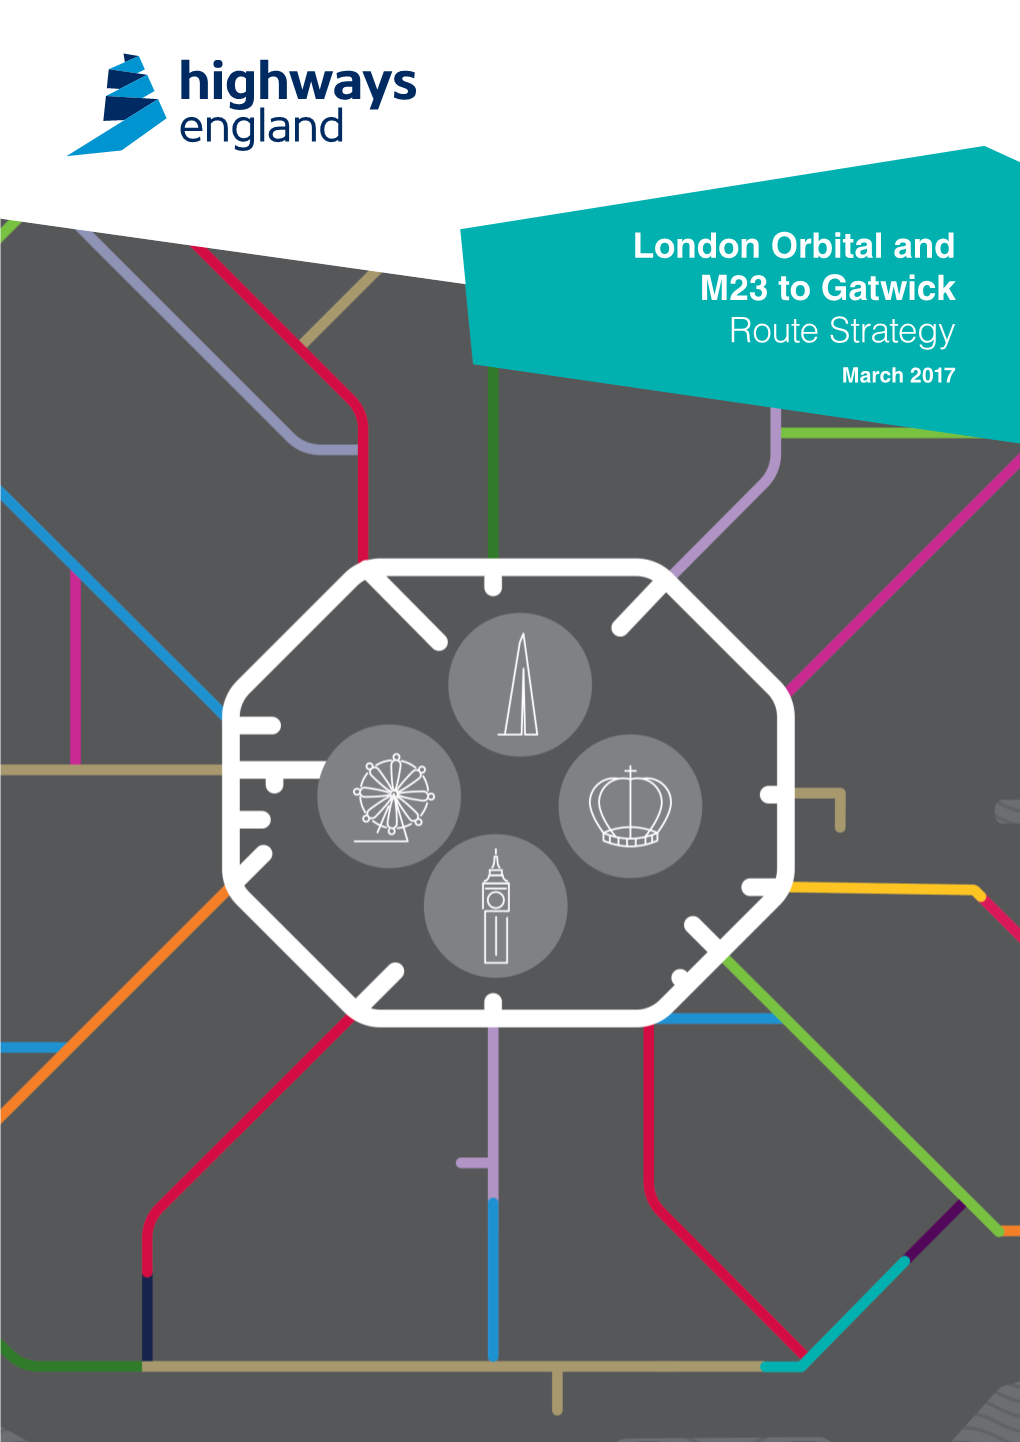 London Orbital and M23 to Gatwick Route Strategy March 2017 Contents 1